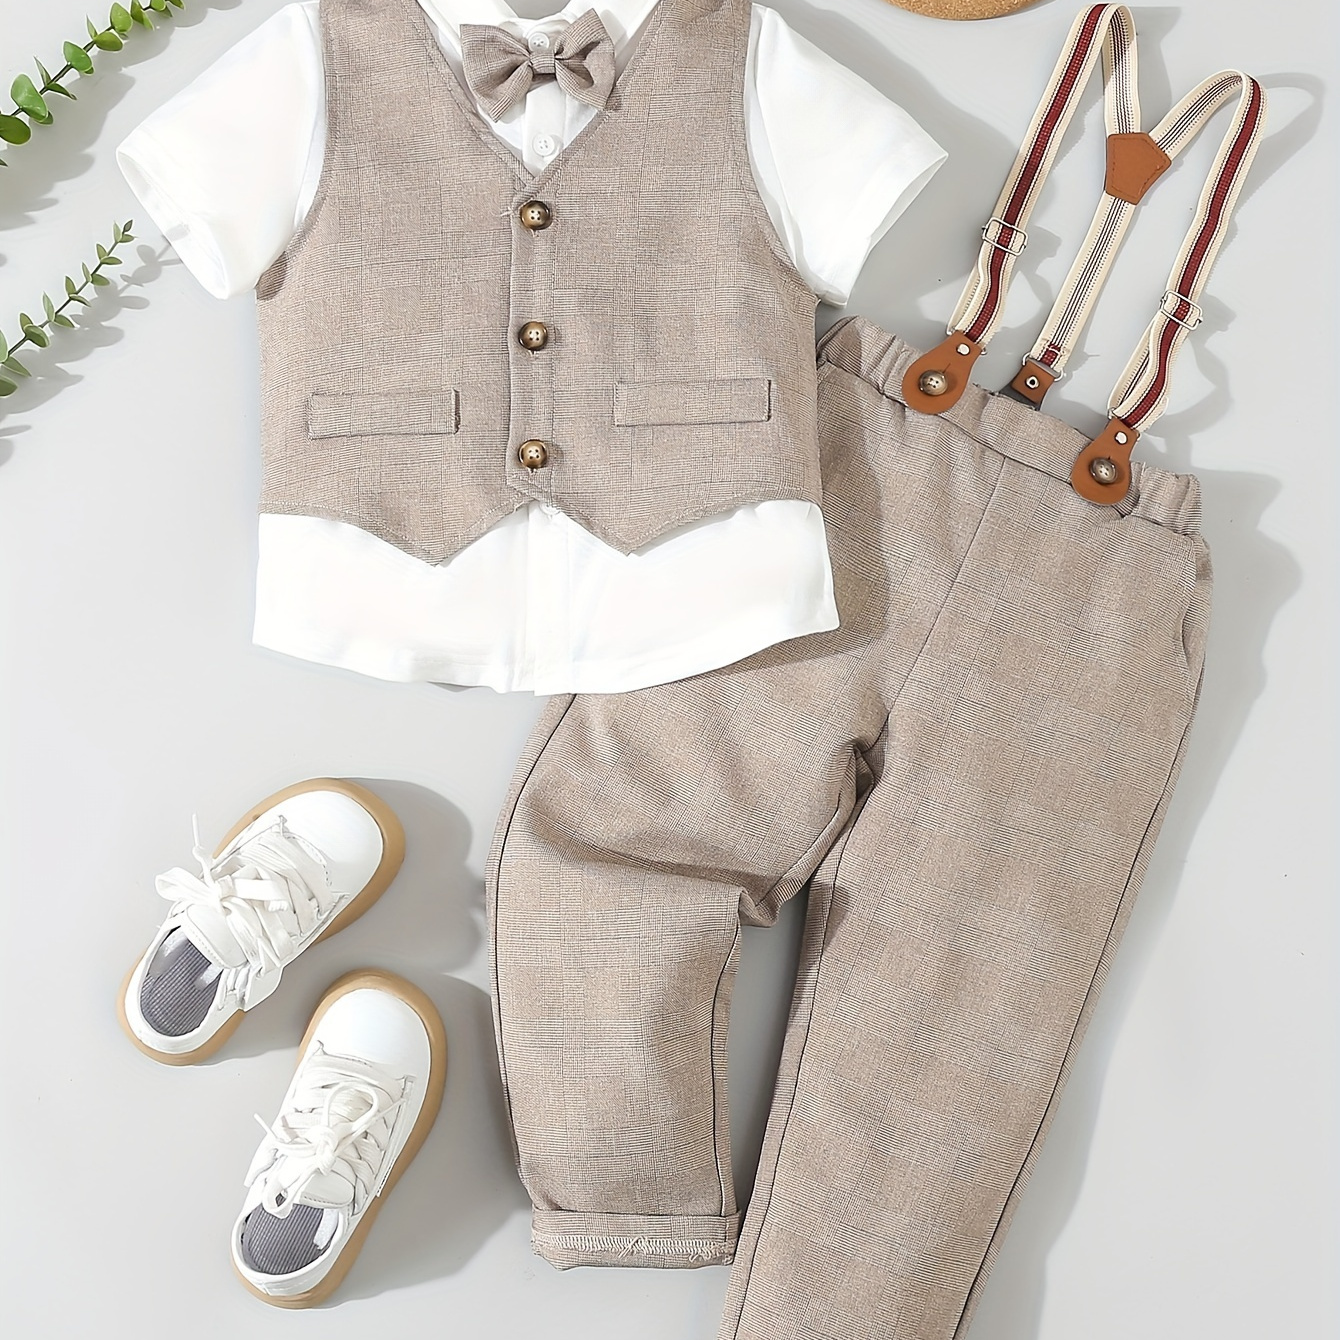 

Boys Short Sleeve Gentleman Outfit, Bowtie Shirt & Waistcoat & Suspender Pants, Boys Clothes For Speech Birthday Party